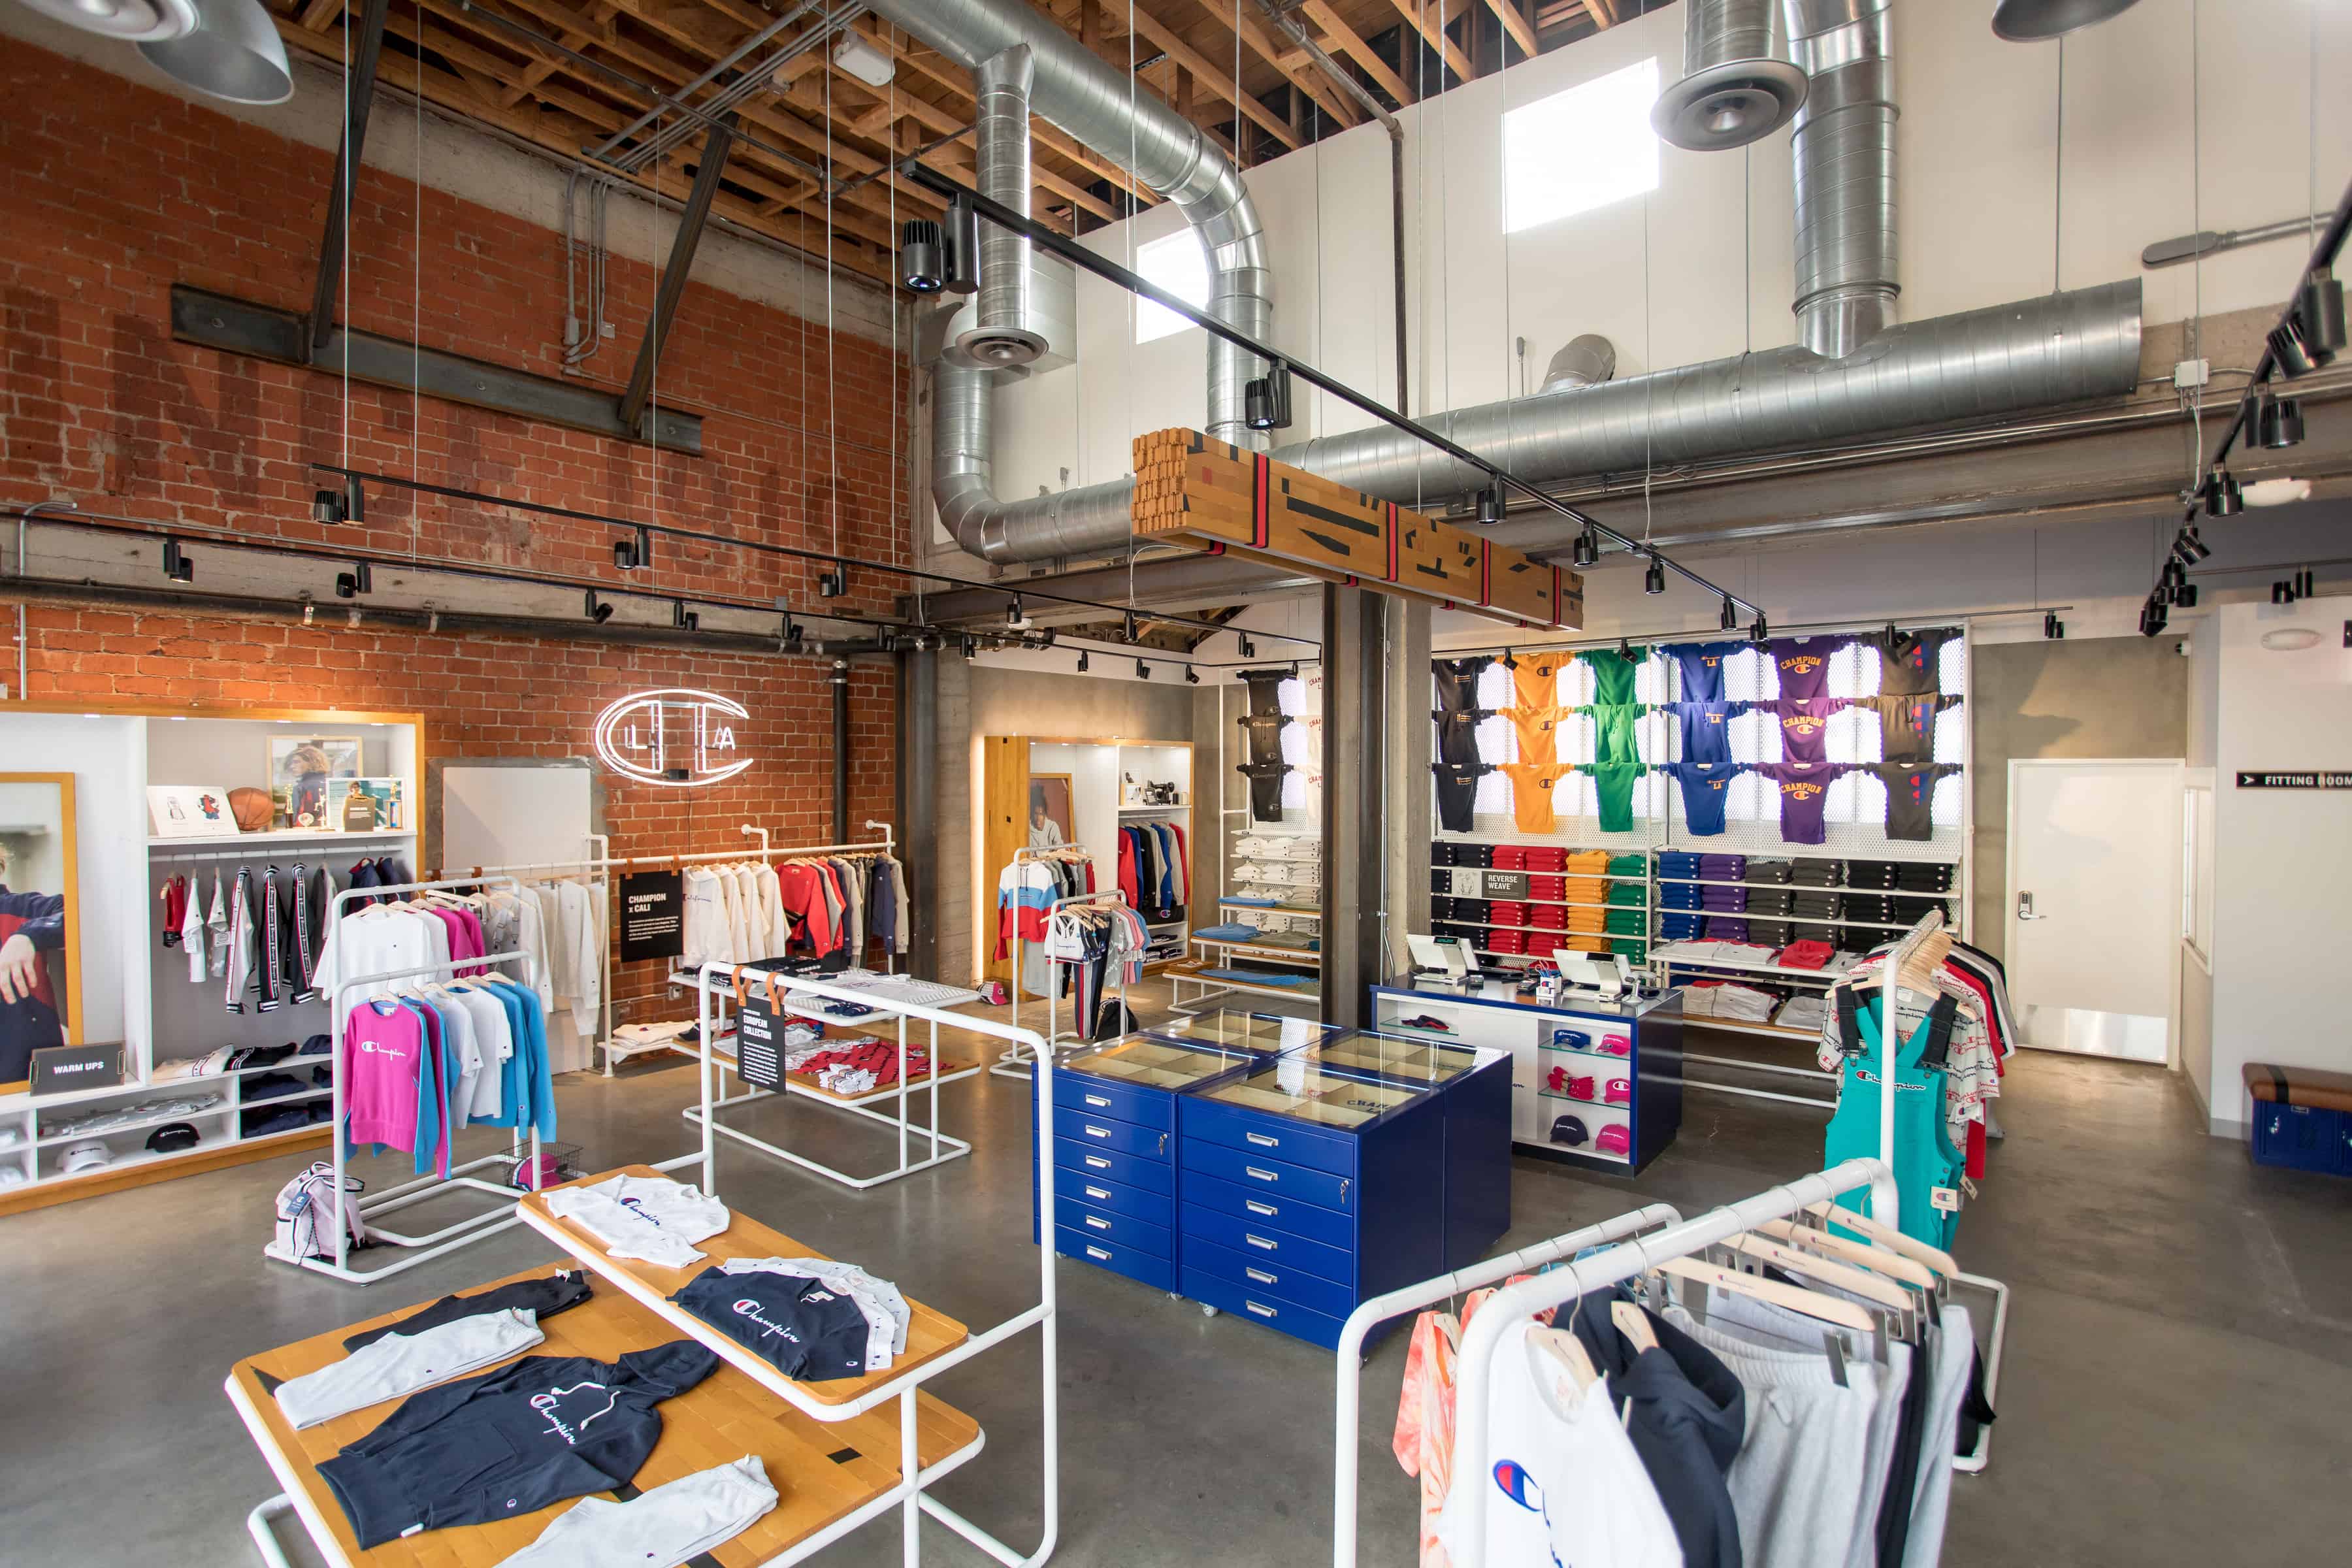 CHAMPION OPENS ITS FIRST-EVER U.S. STORE IN ANGELES